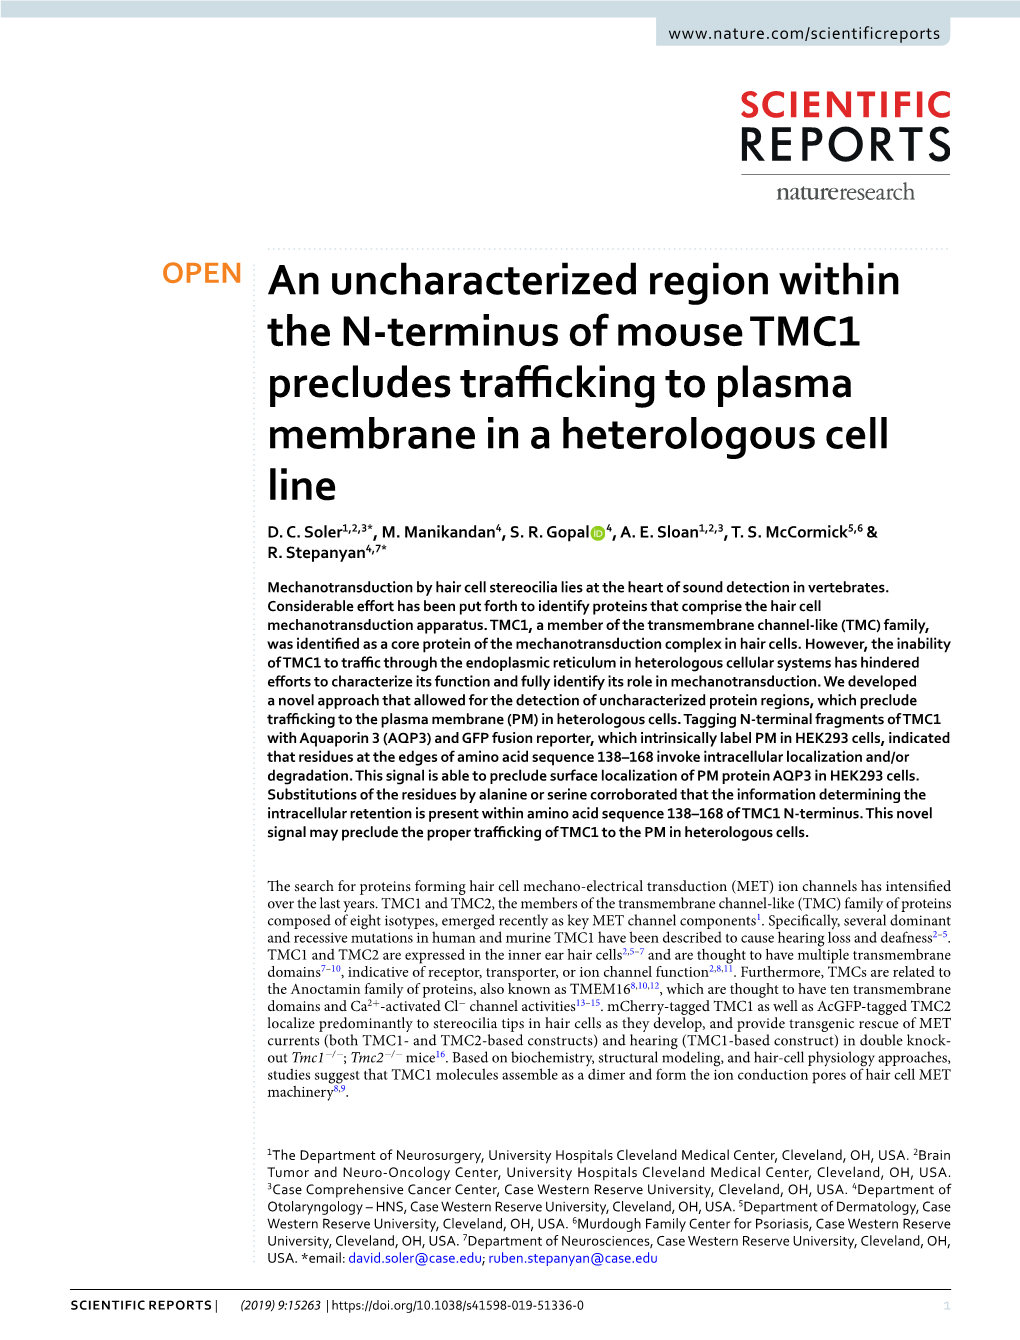 An Uncharacterized Region Within the N-Terminus of Mouse TMC1 Precludes Trafcking to Plasma Membrane in a Heterologous Cell Line D